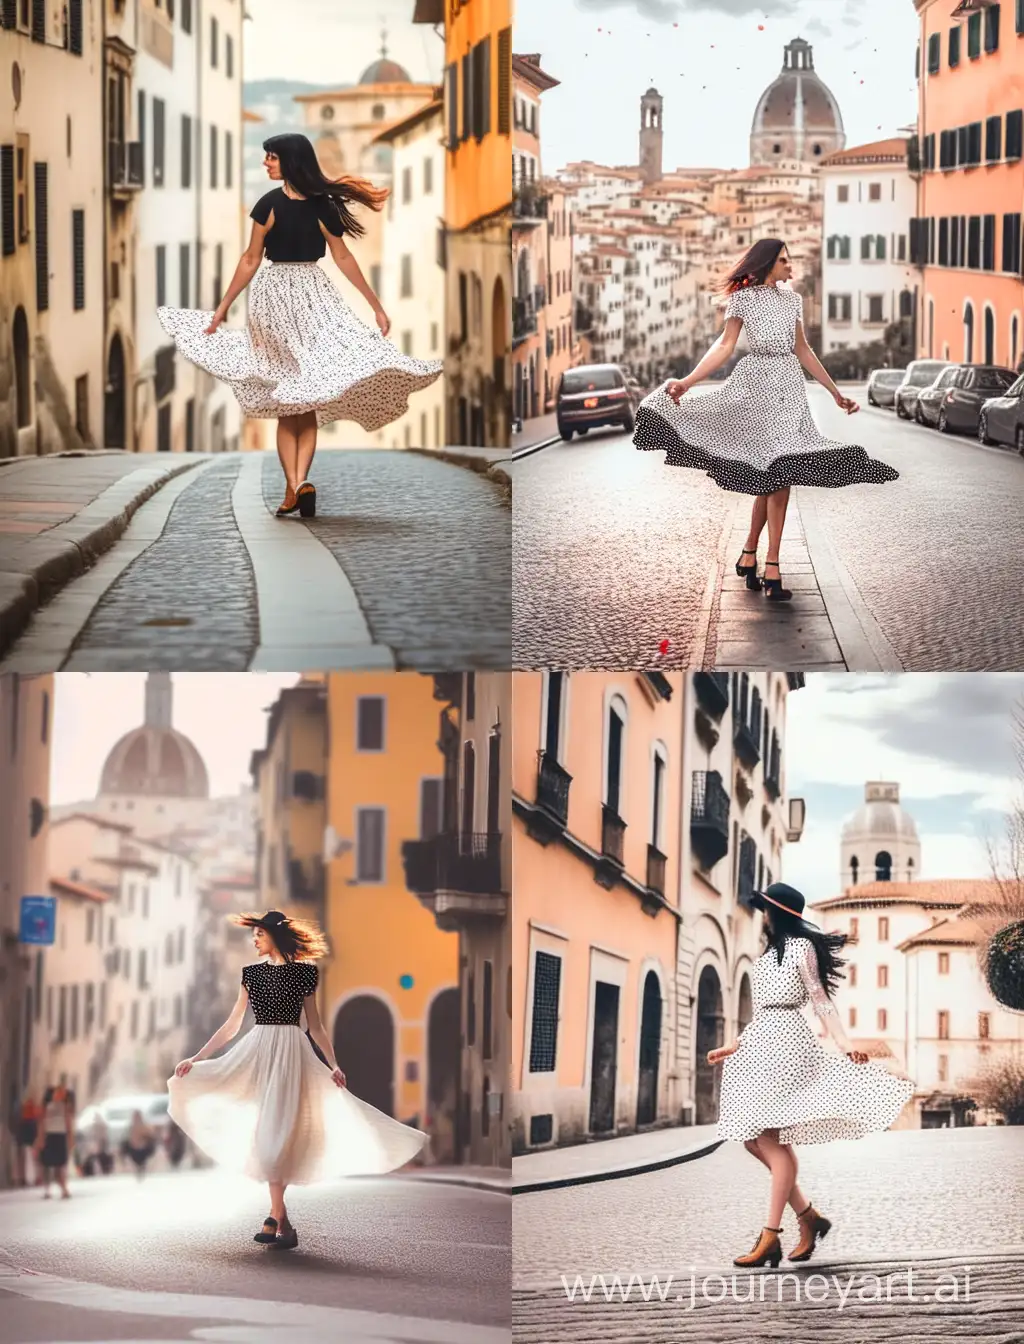 young italian 25yo woman wearing a white and black dress with orange little dots, full body, dress inspired by an insect, fashion design, realistic, florence streets blurred in the background